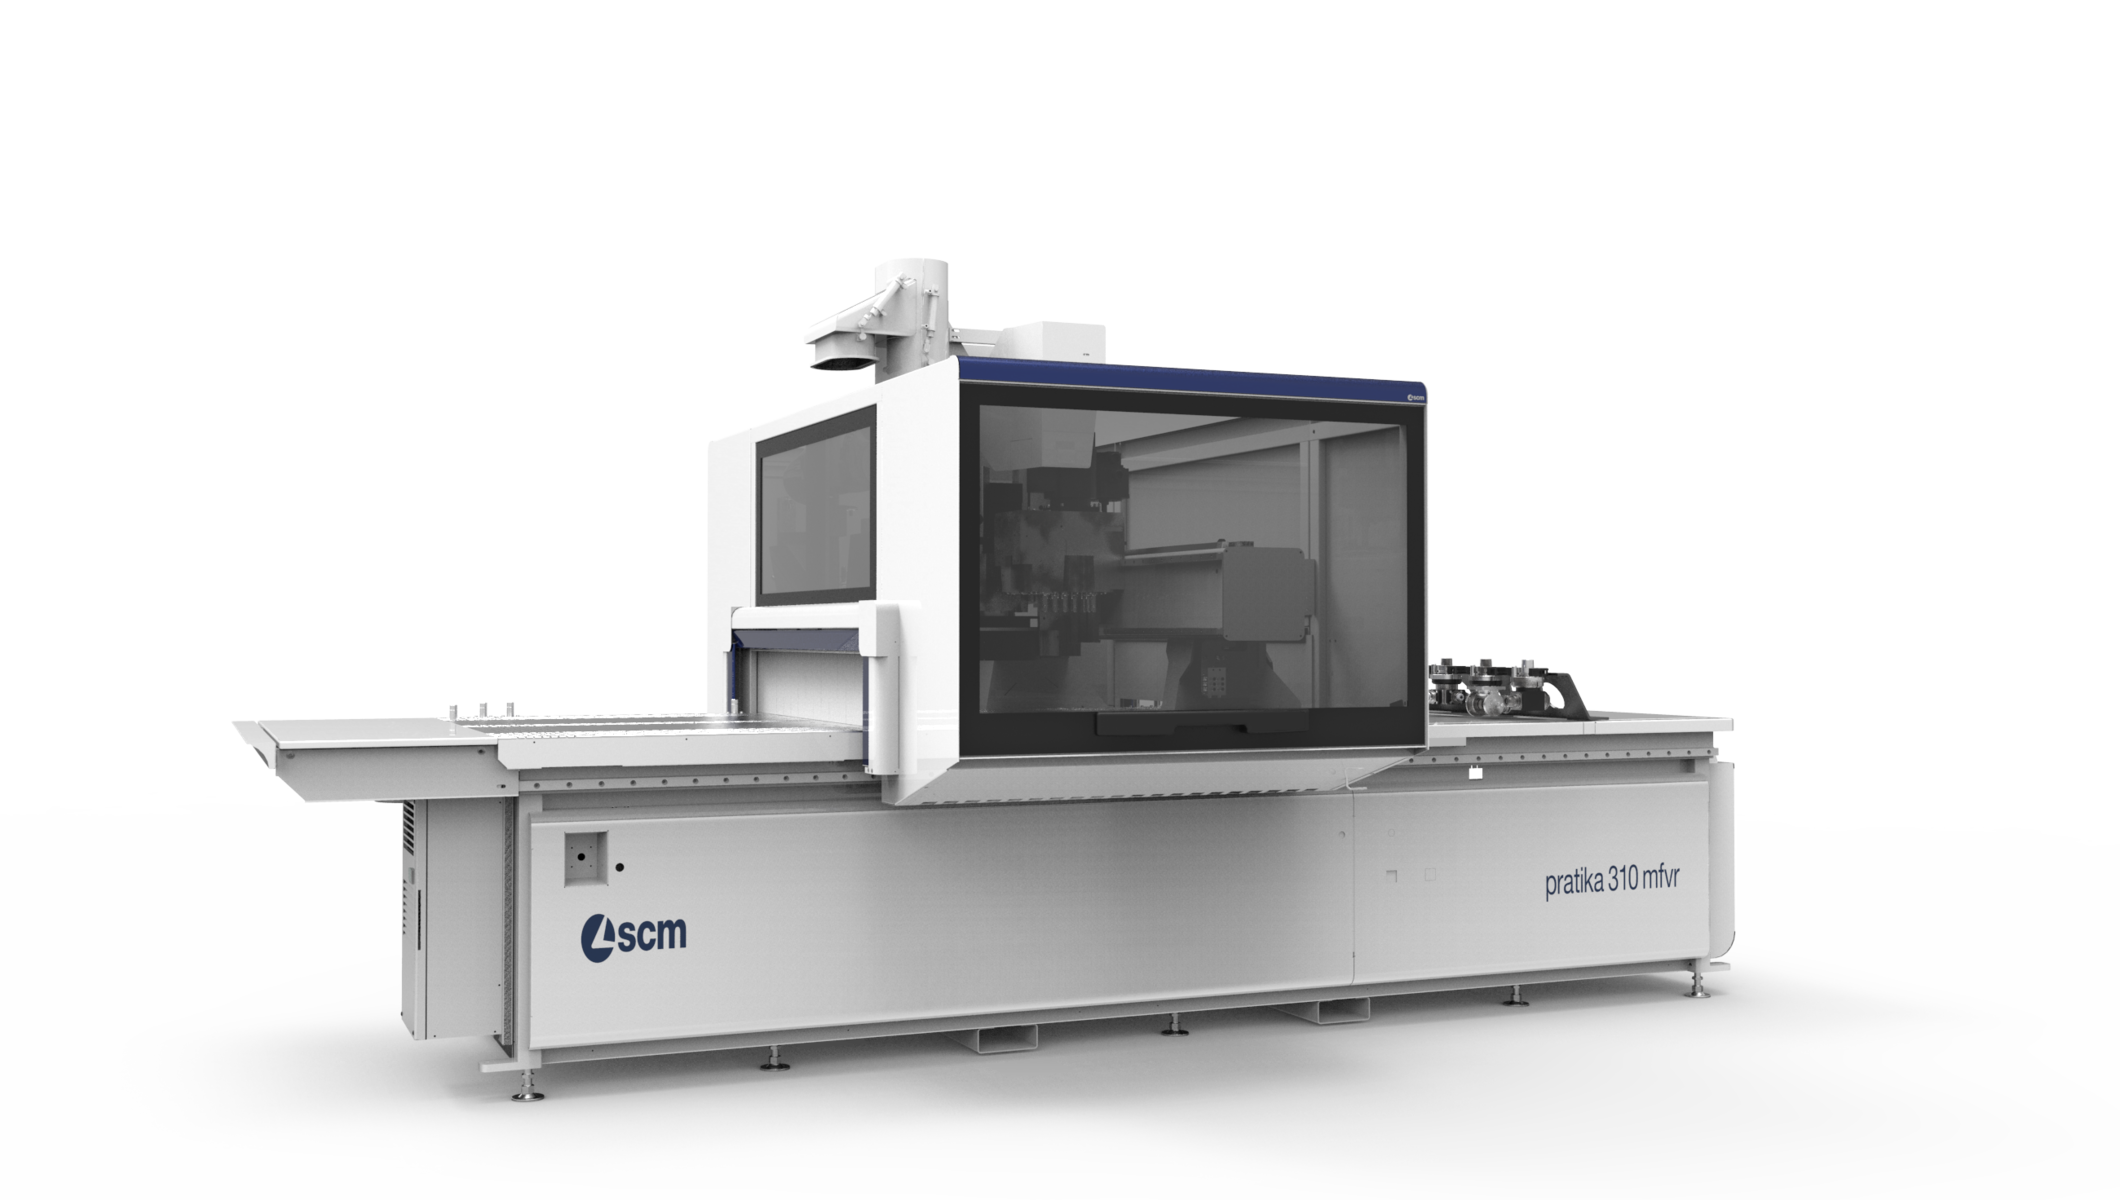 CNC Machining Centres - CNC Nesting Machining Centres for routing and drilling - pratika 310mfv / 310mfvr